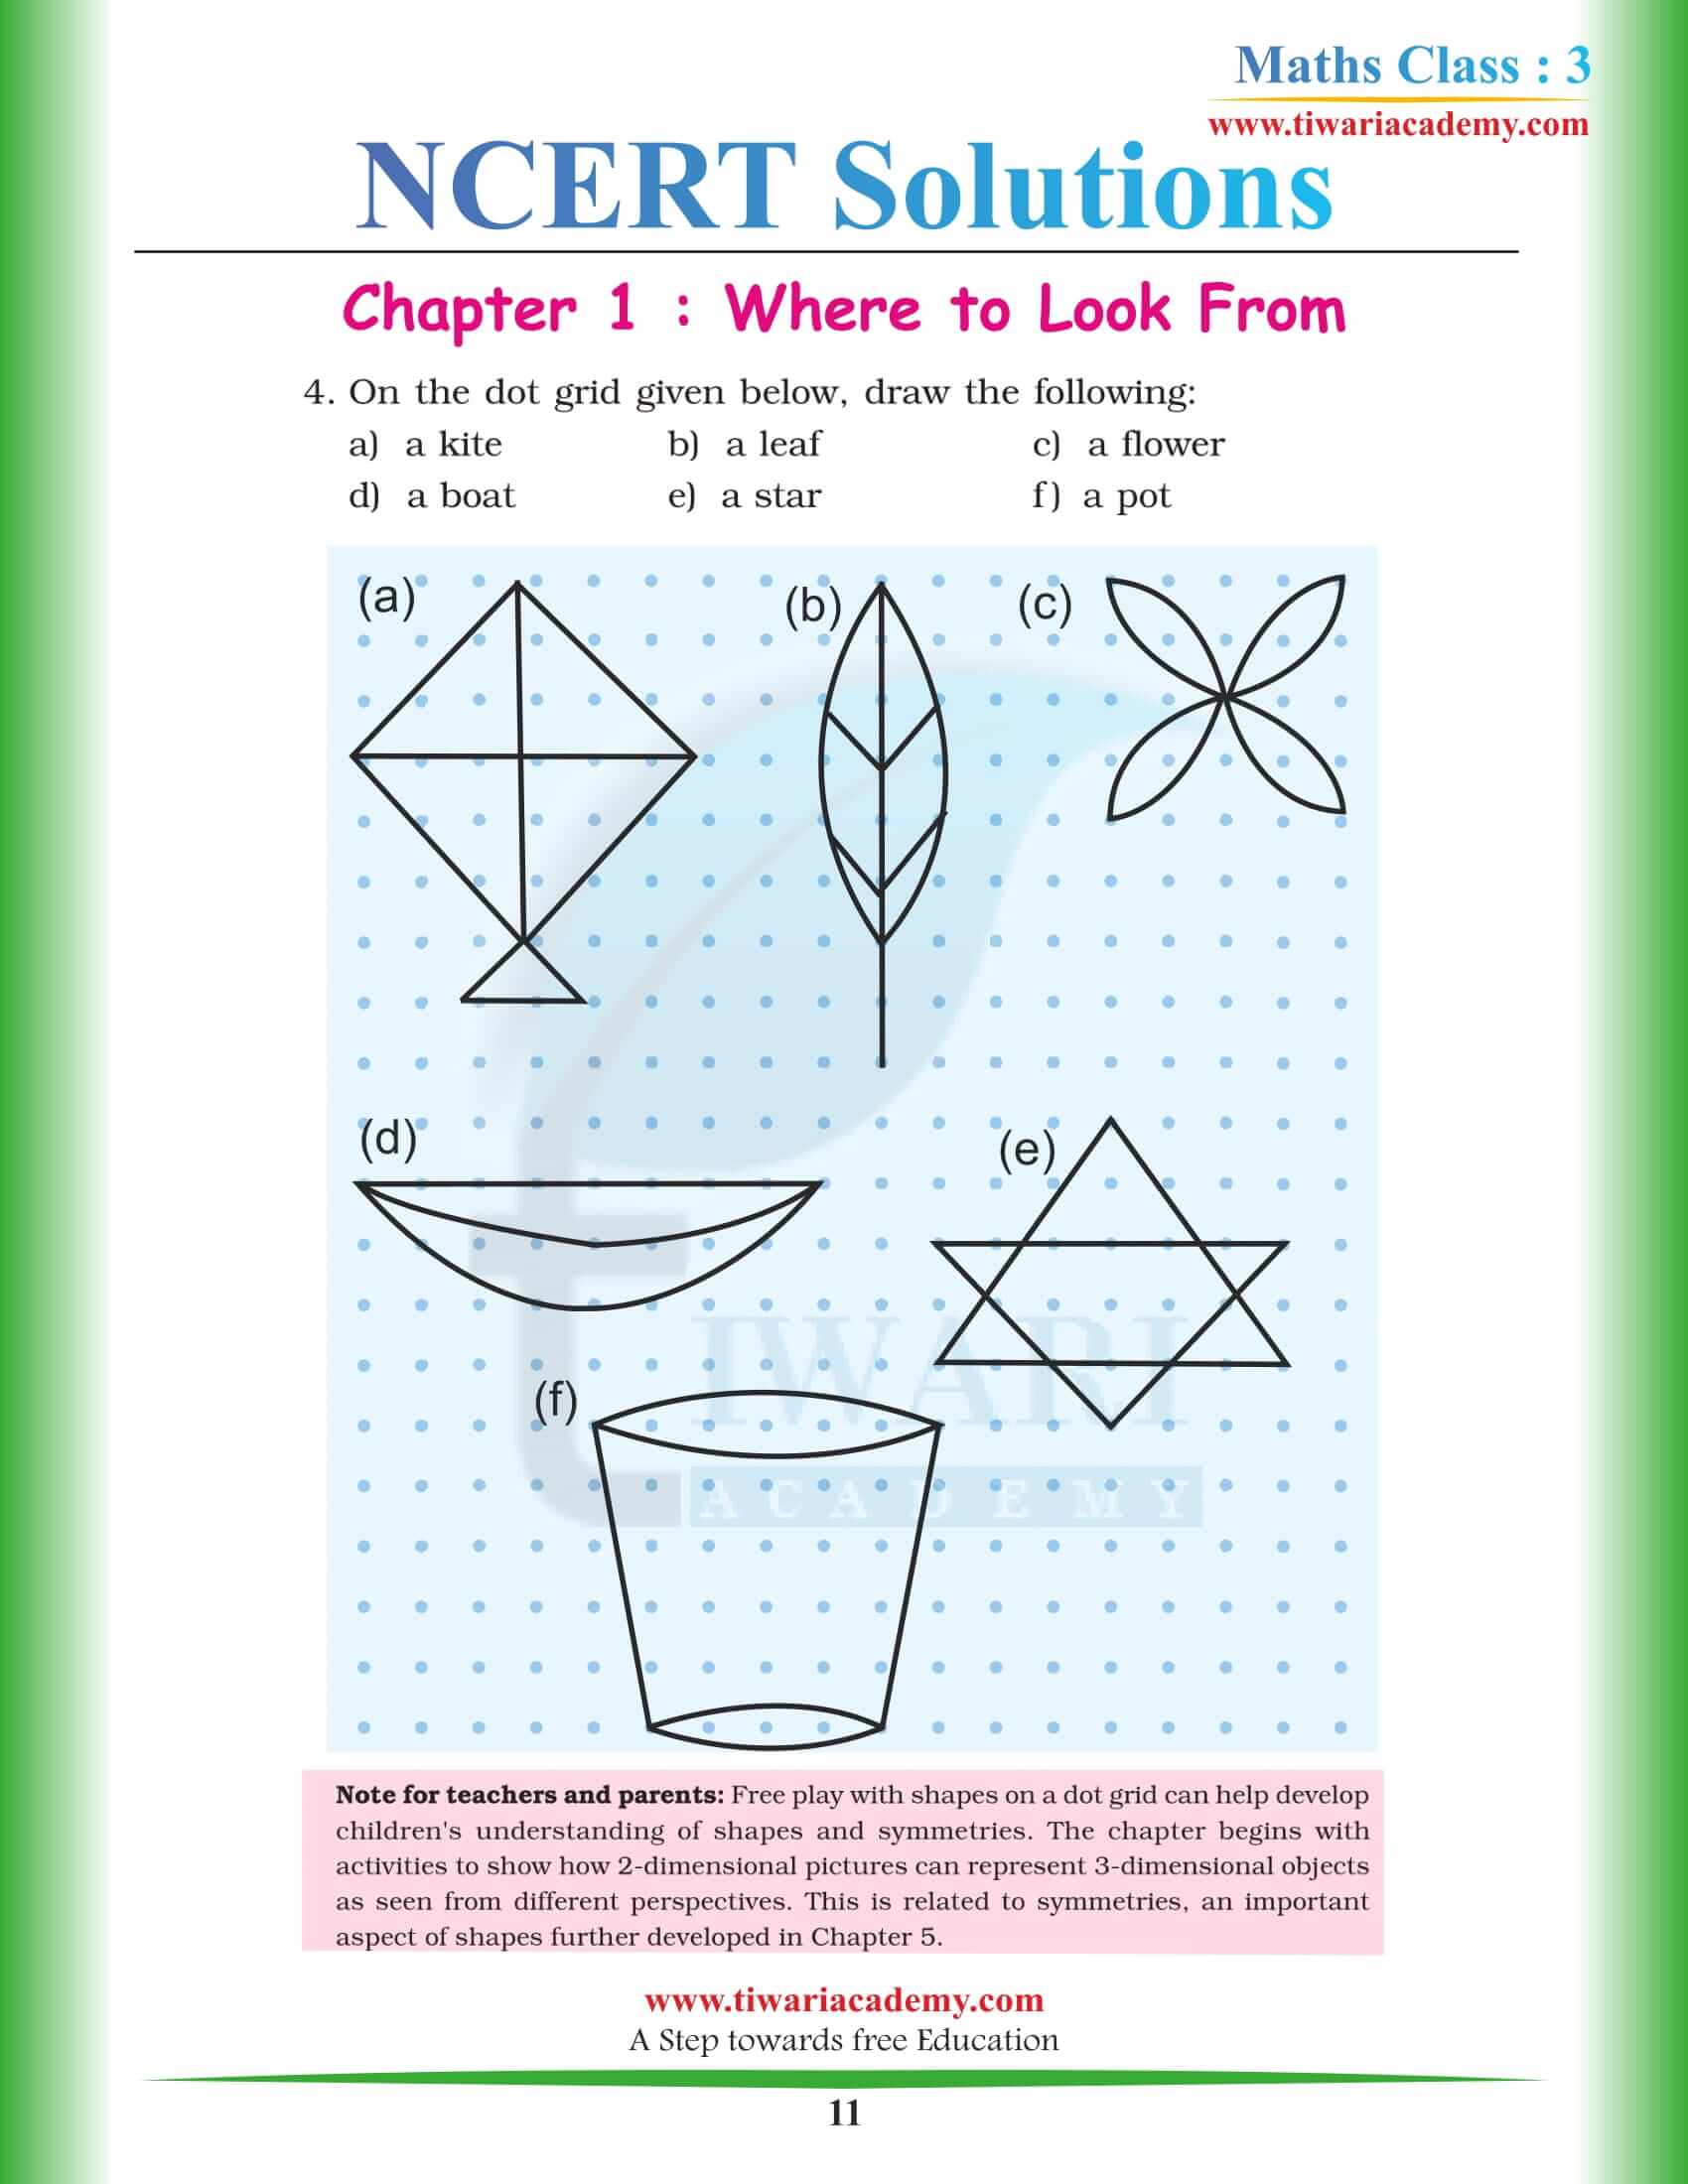 NCERT Solutions for Class 3 Maths Chapter 1 free download